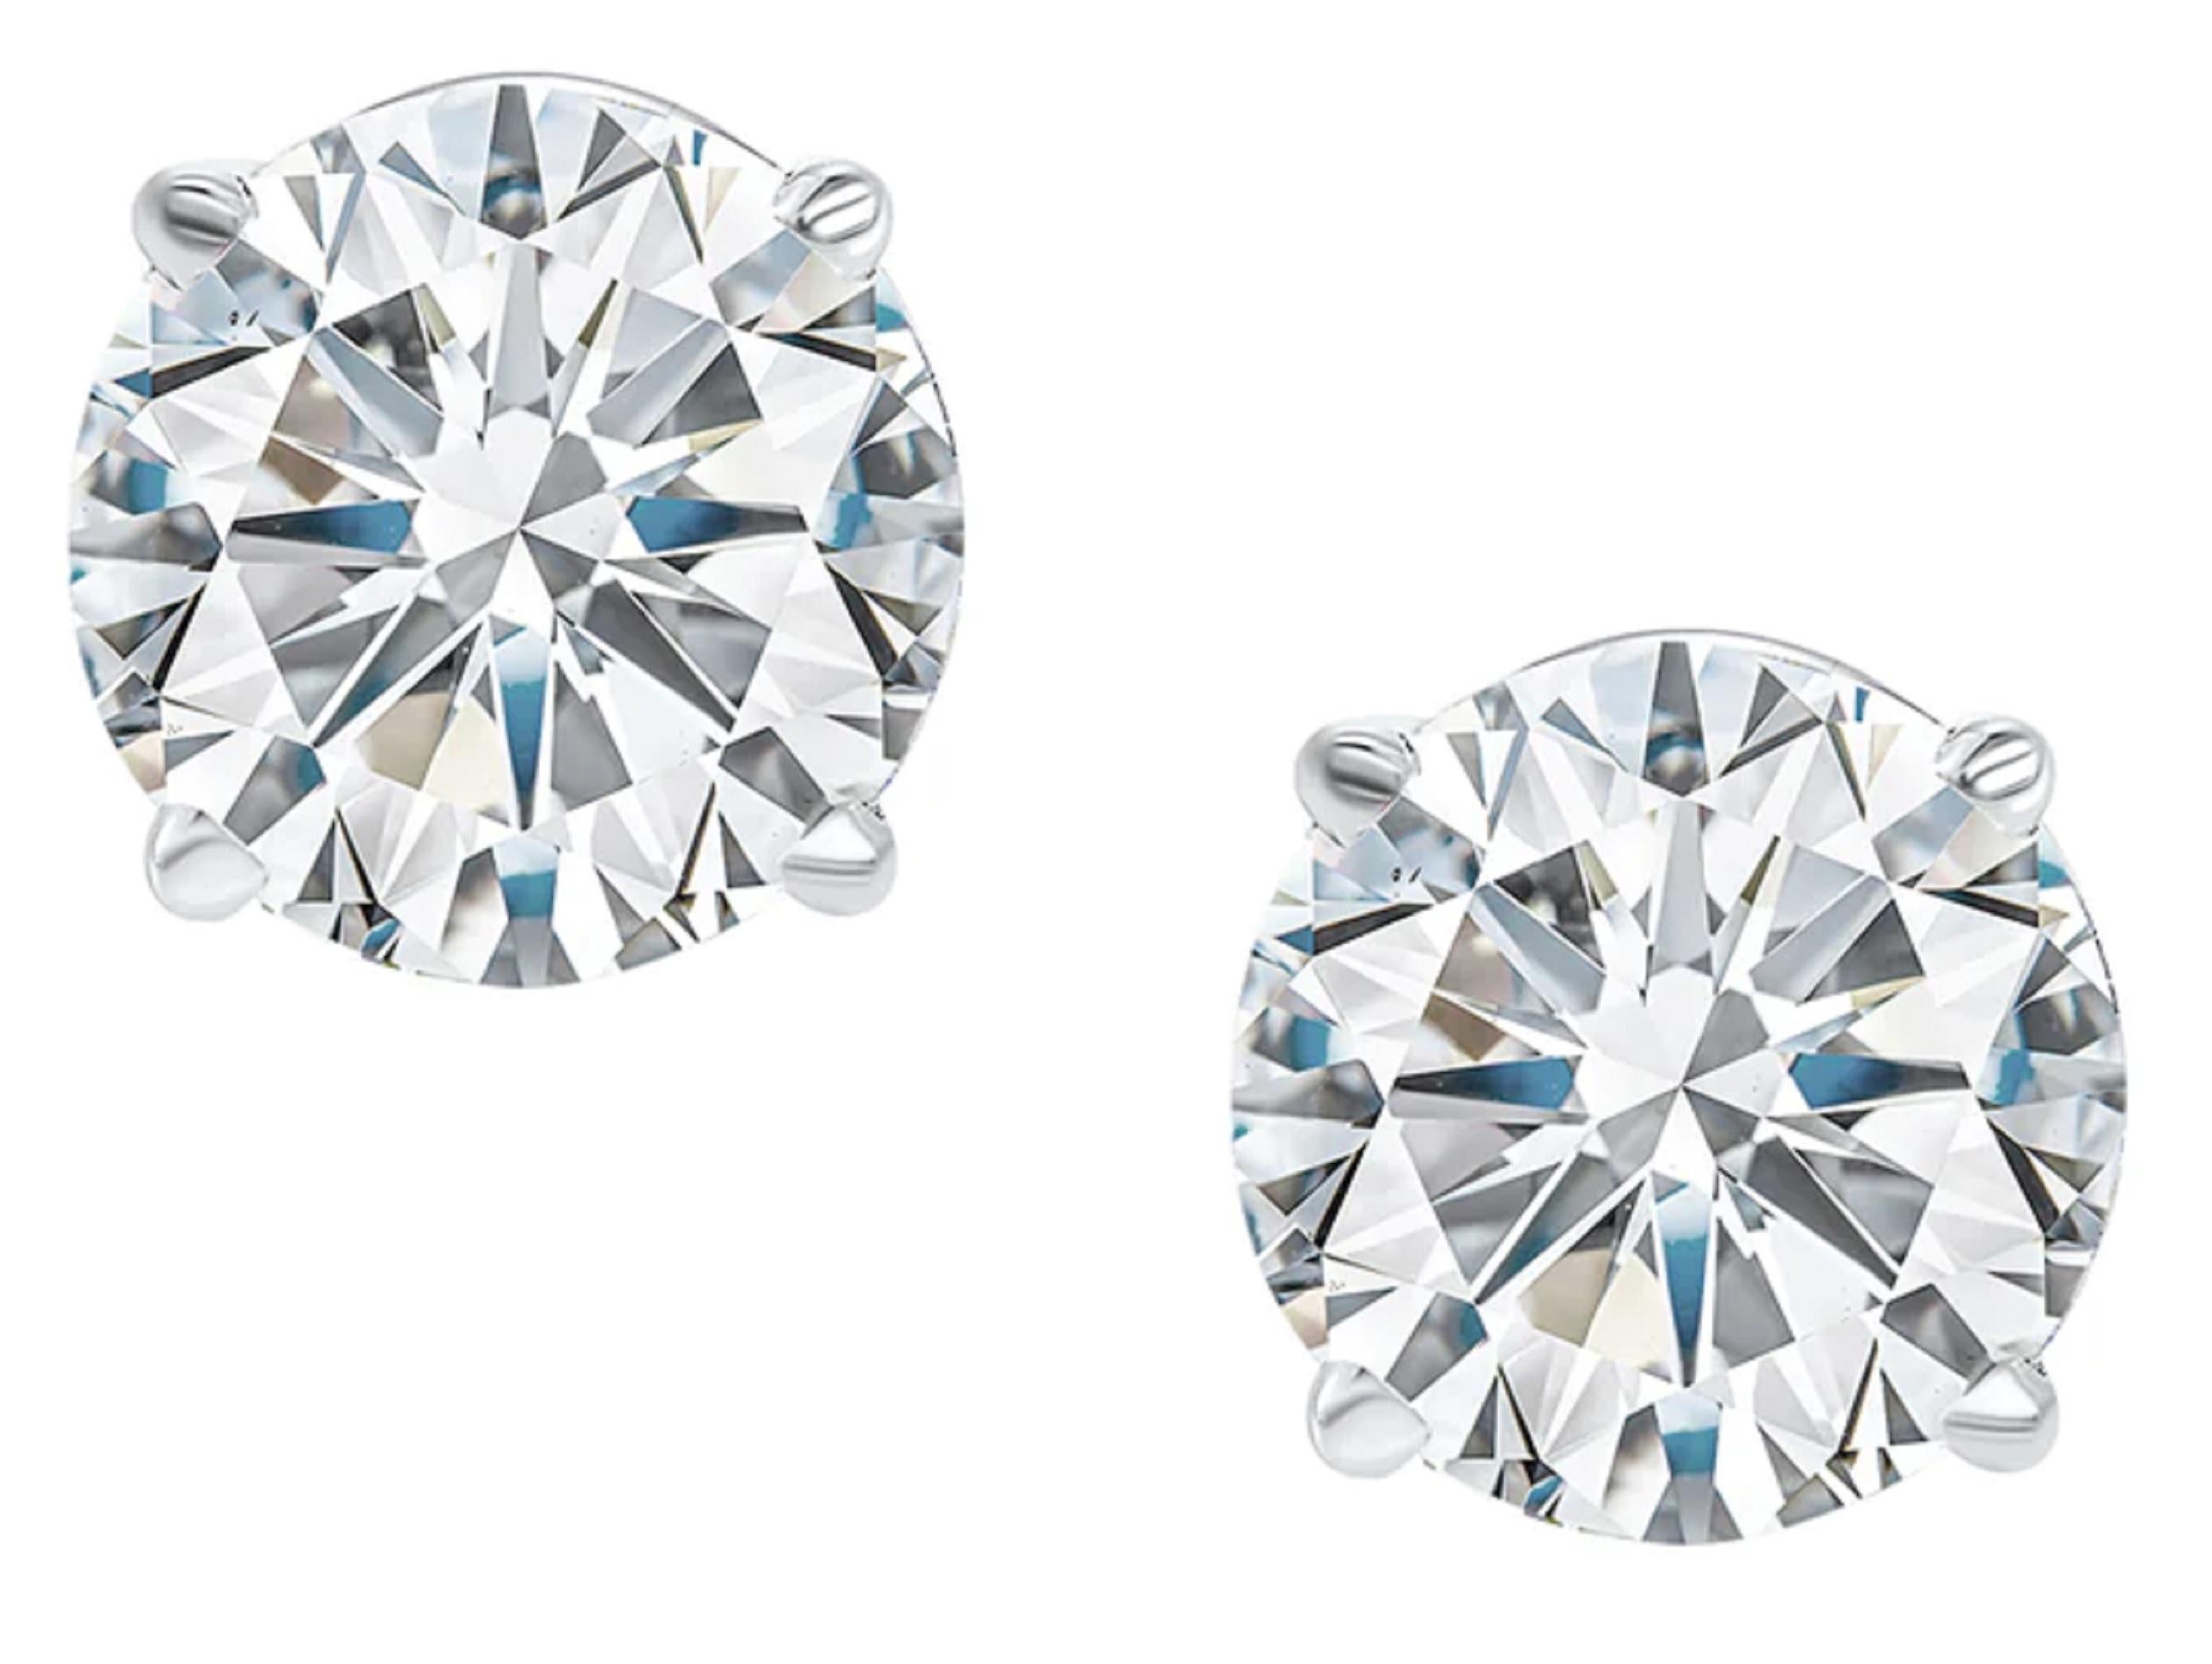 A gorgeous and very high quality 7ctw matched pair of Very large and impressive size at 7.12 carats!

- Nice white face up with G-H color

- SI3-I1 clarity with scattered inclusions and bright sparkle. Inclusions blend in perfectly when worn

-